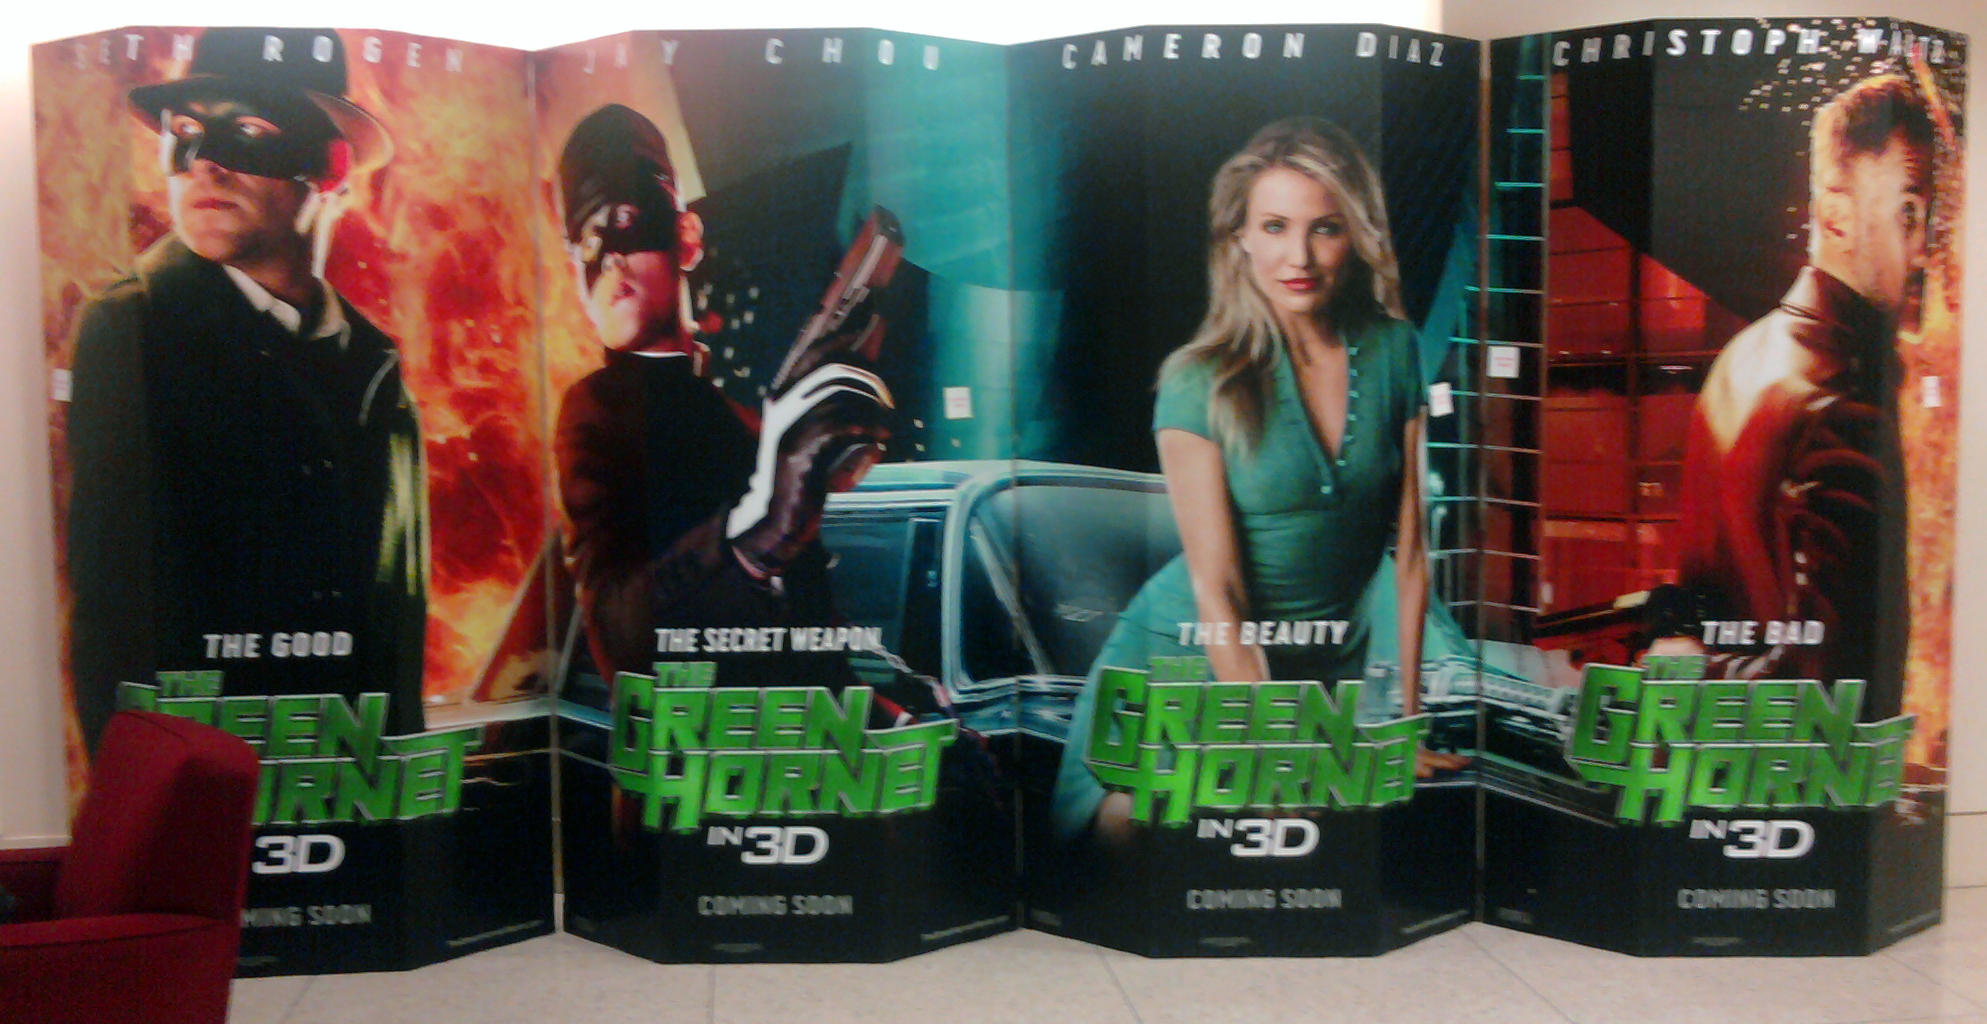 The-Green-Hornet-movie-poster-movie-theater-display-2.jpg